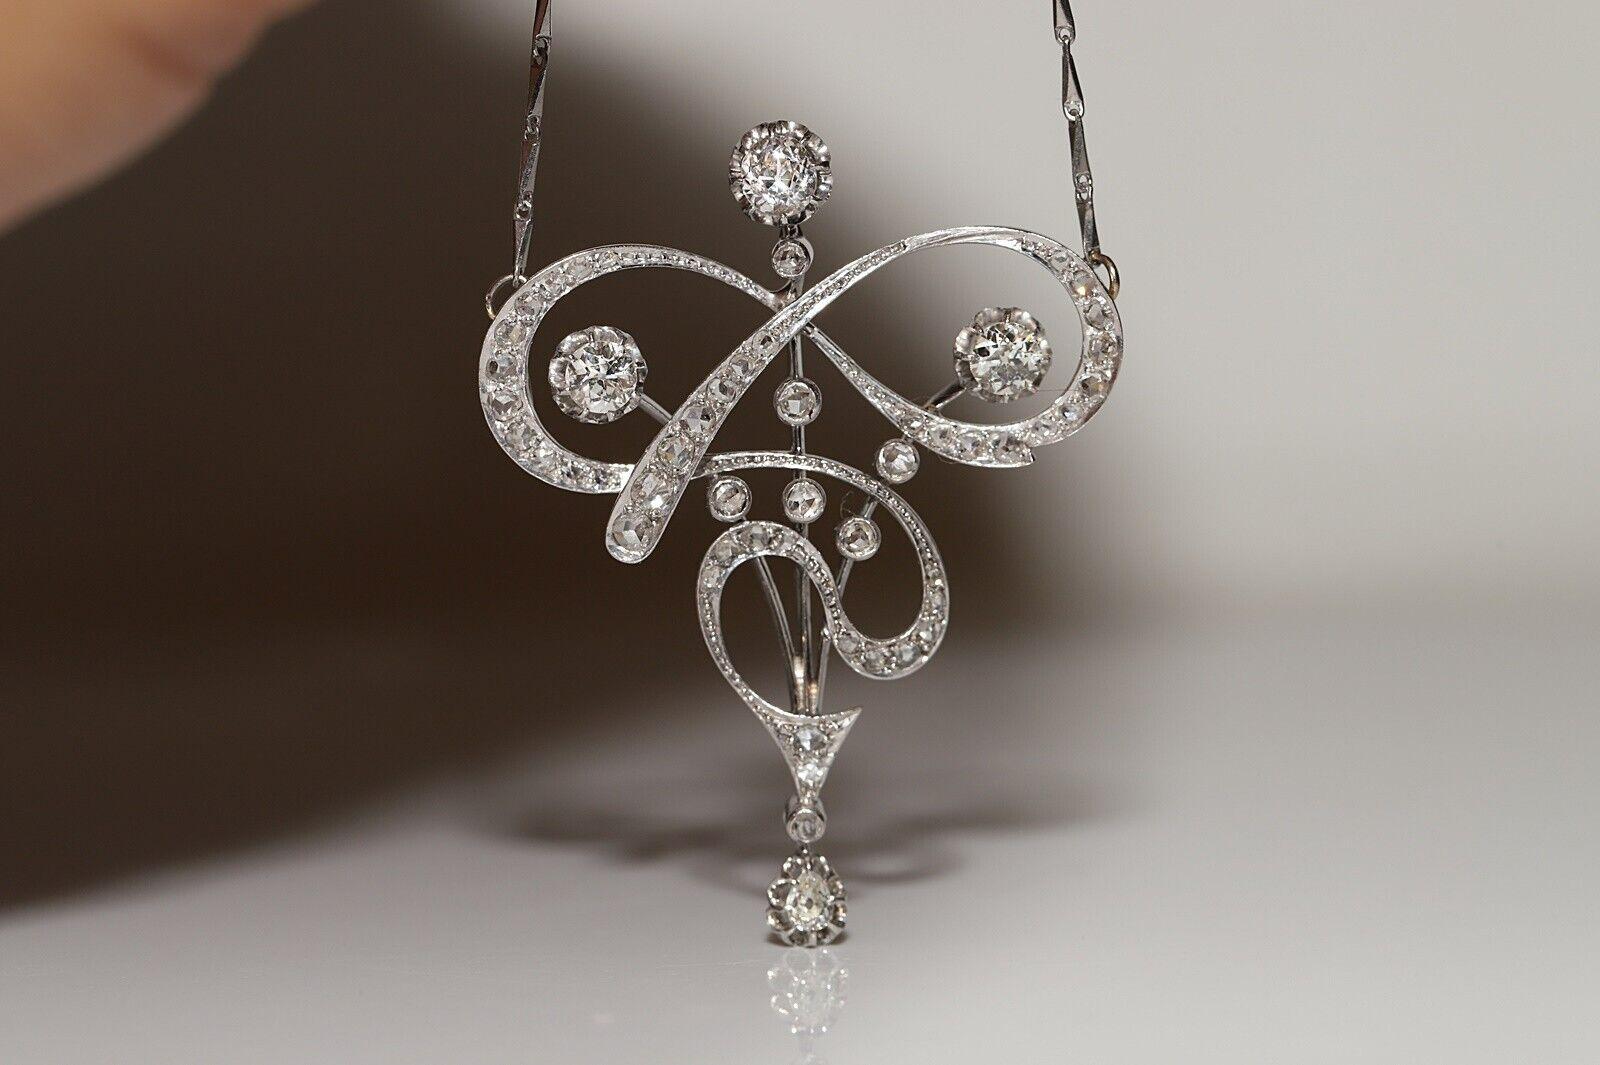 In very good condition.
Total weight 13.8 grams.
Totally 0.75 ct rose cut diamond.
Totally 1.65 ct brilliant cut diamond.
The diamond has vvs-vs-s1 clarity and G-H-I color.
The necklace 25.5 long.
Original Art Nouveau item about 100 years